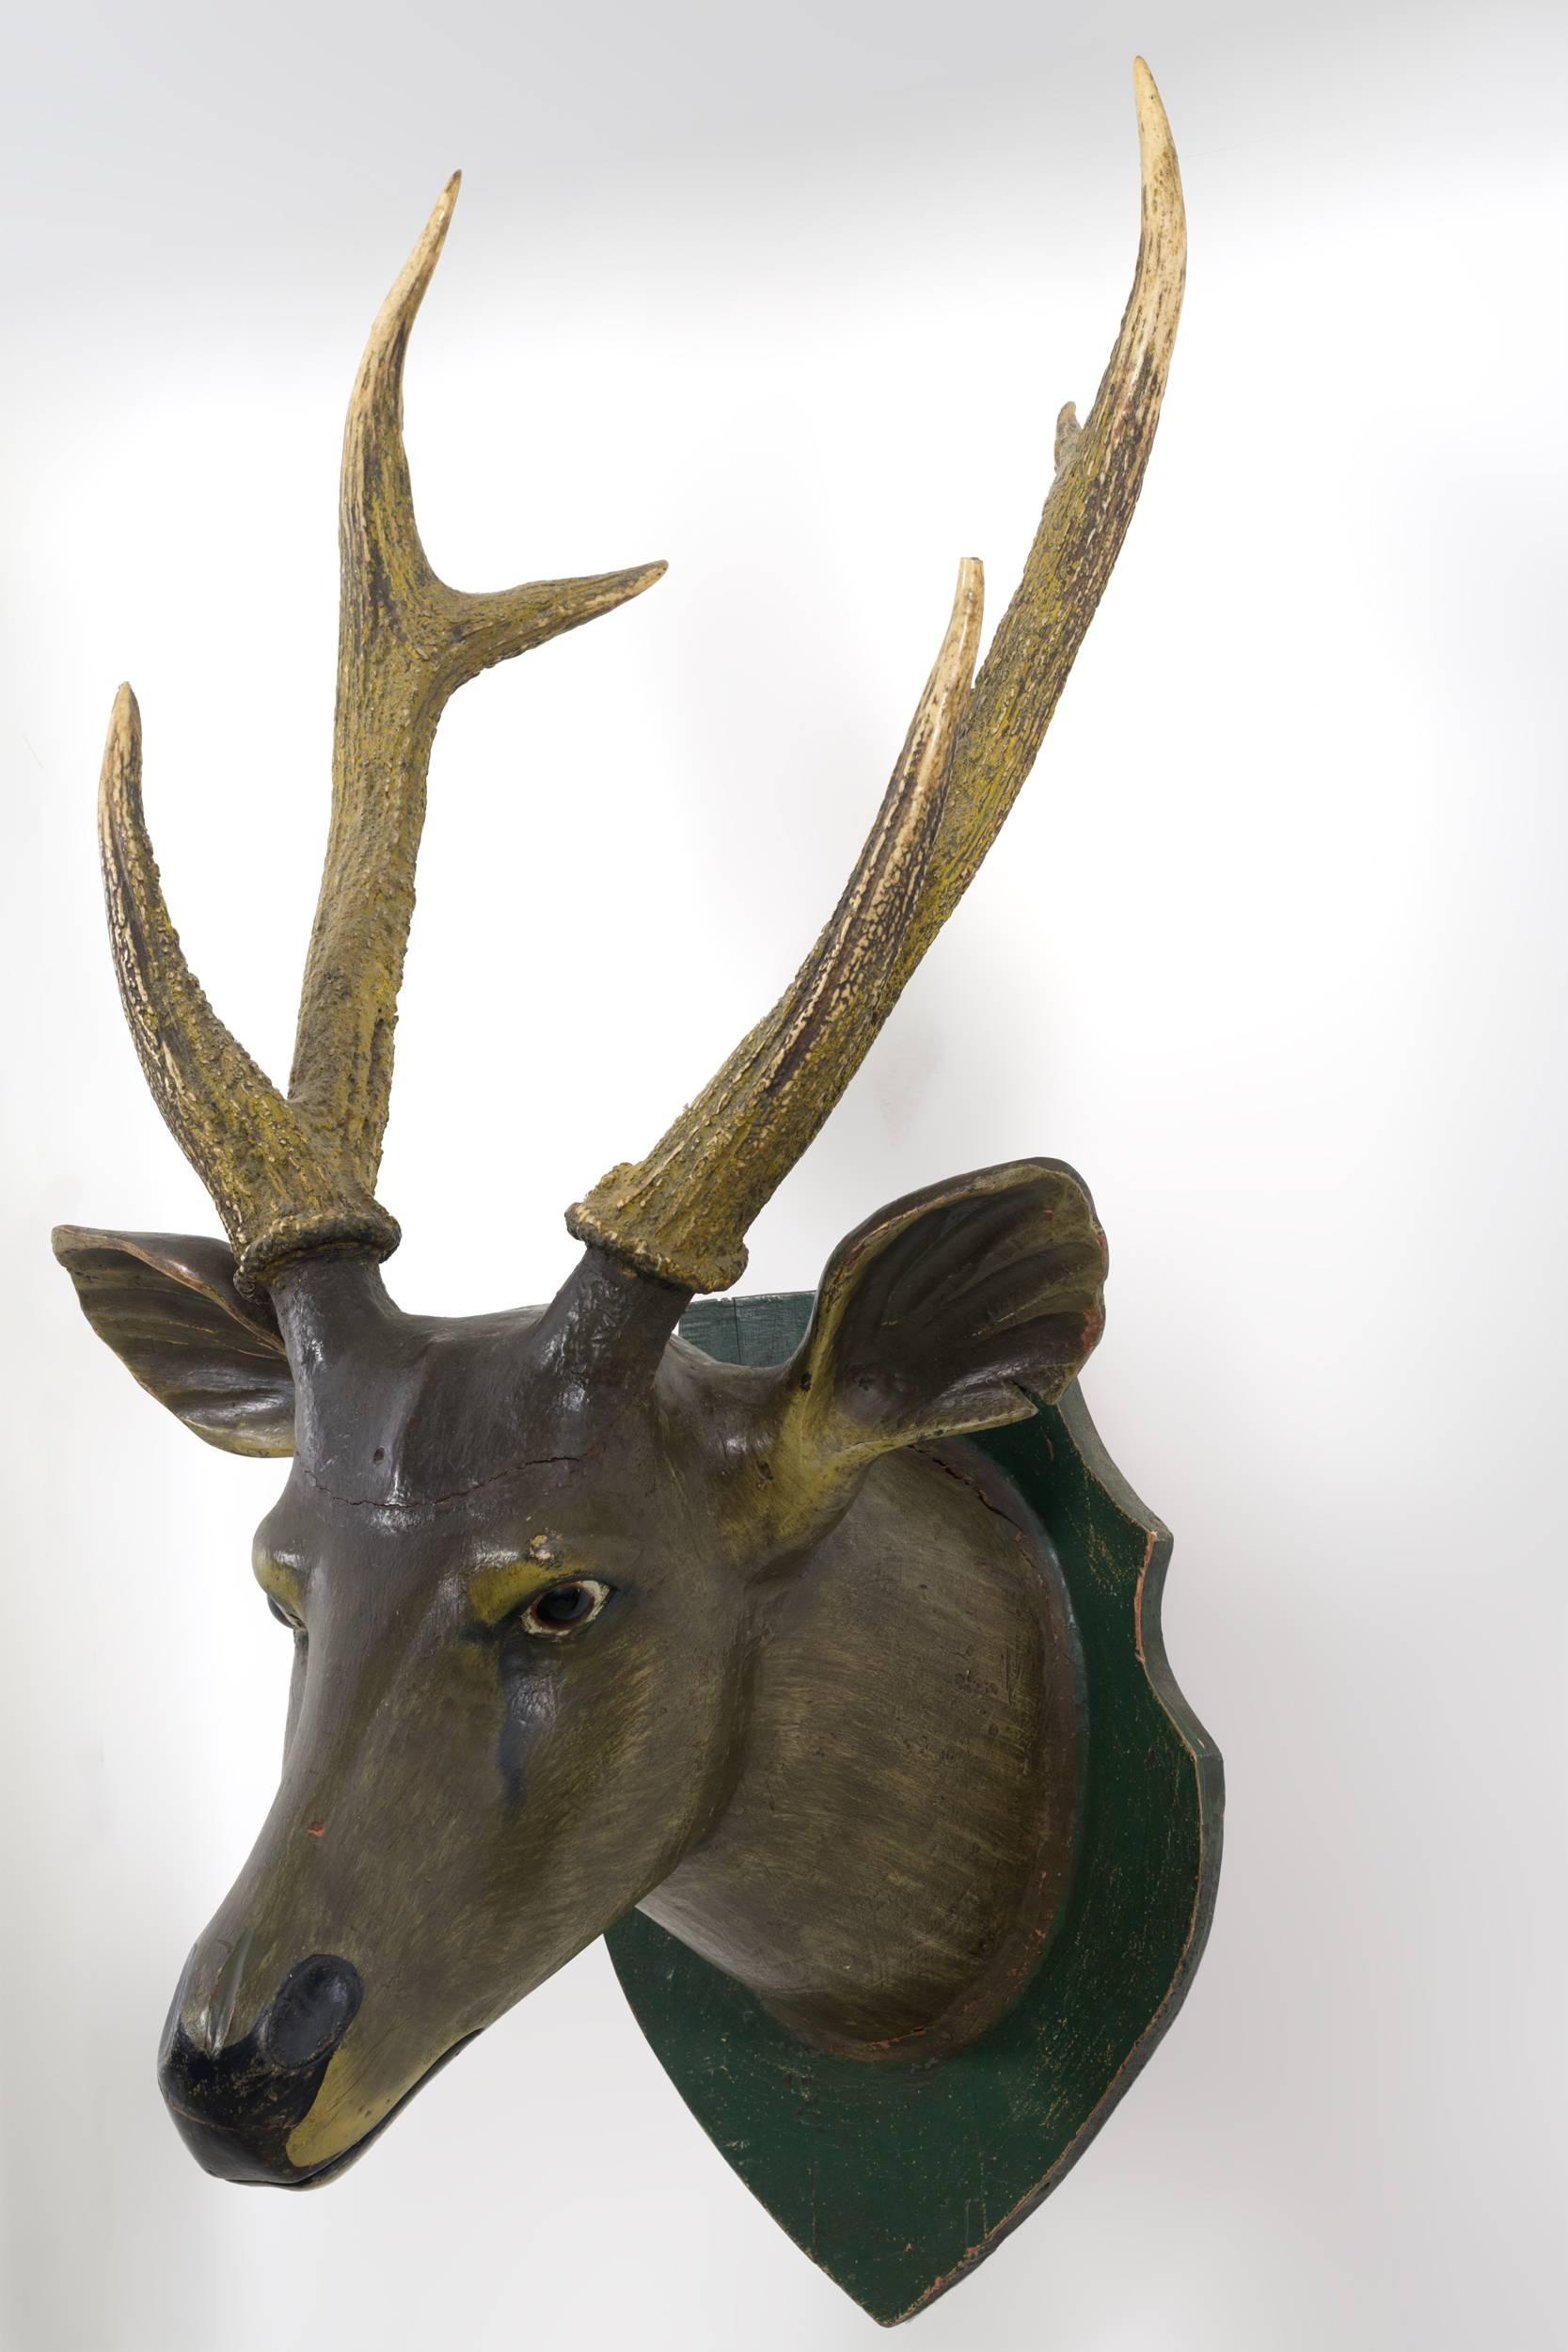 Carved and painted folky deer head with glass eyes
recycled antler, mounted on a green painted shield
plaque. Carved in naturalistic style. Original condition
with some age cracks. Attributed to Axel Gustafson
(1867-1945), Franklinville, New